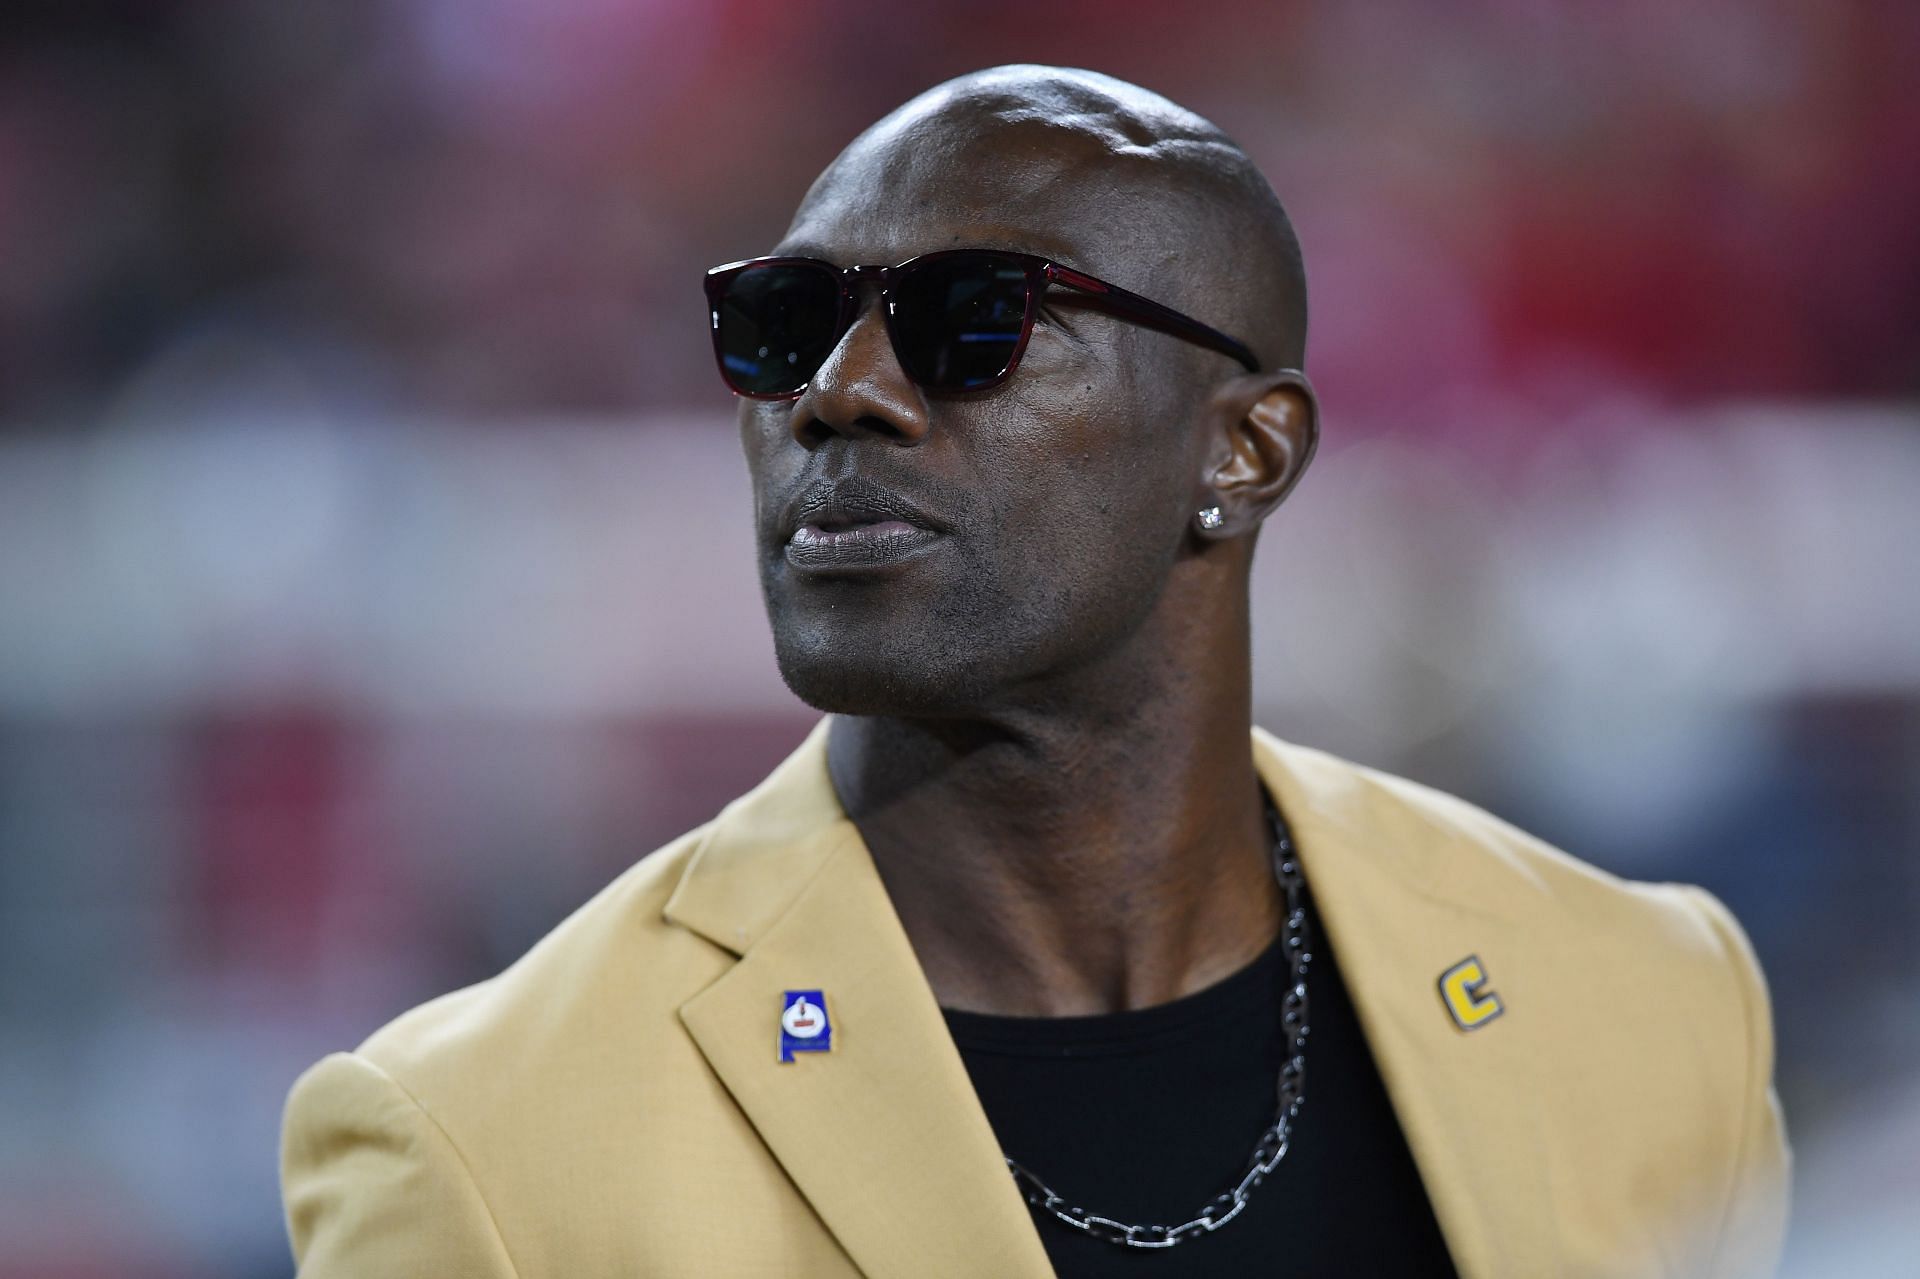 Hall of Fame Wide Receiver Terrell Owens